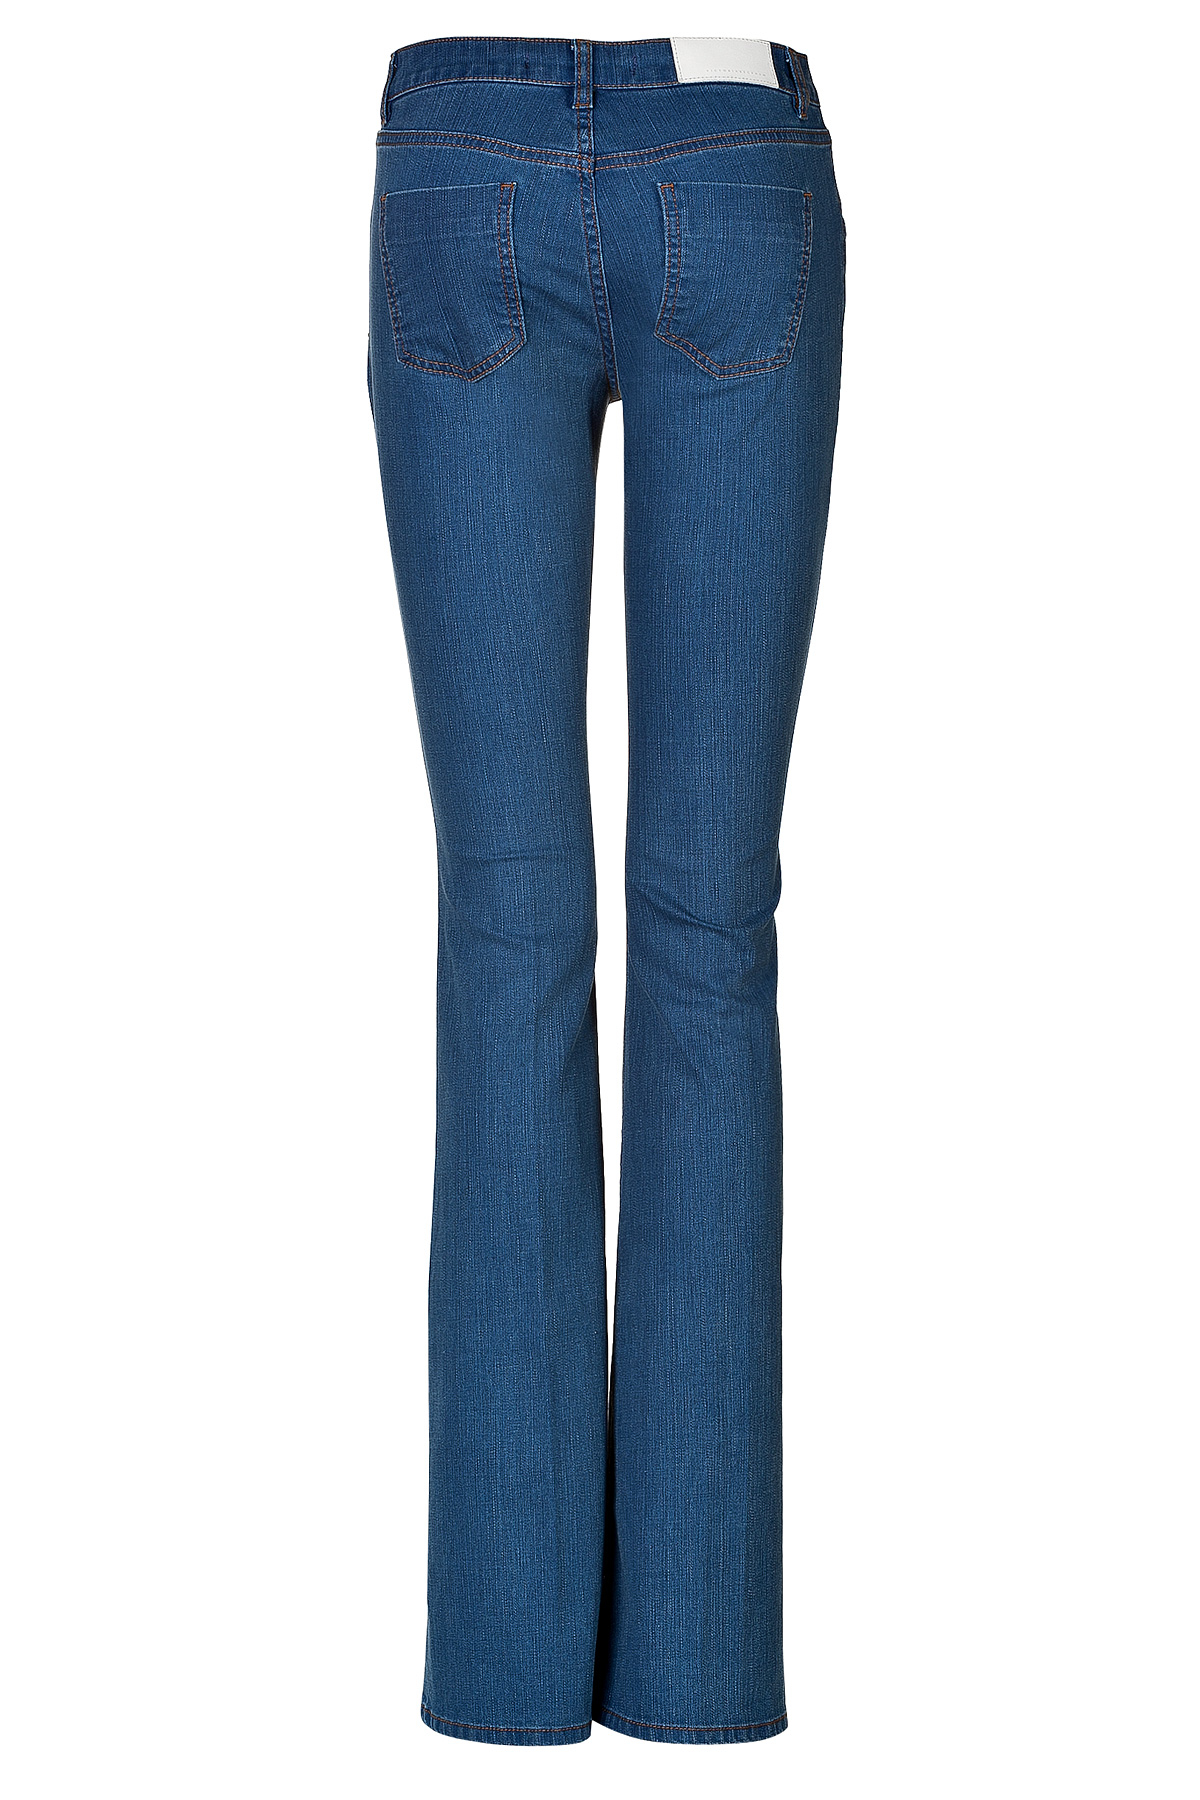 Lyst - Victoria Beckham Flared Jeans - Blue in Blue